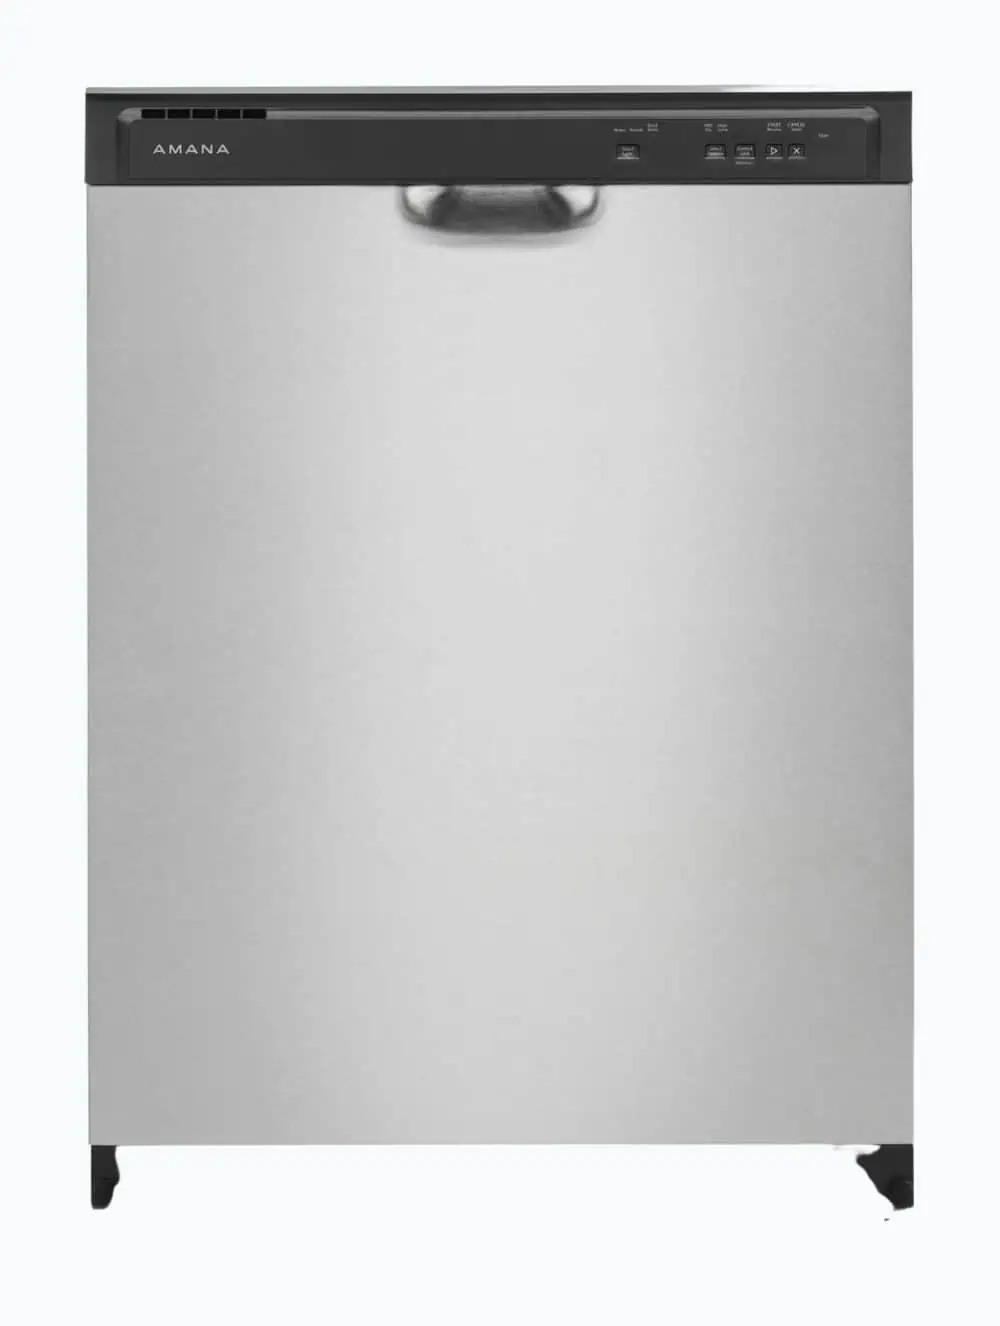 Product Image of the Amana With Triple Filter Wash